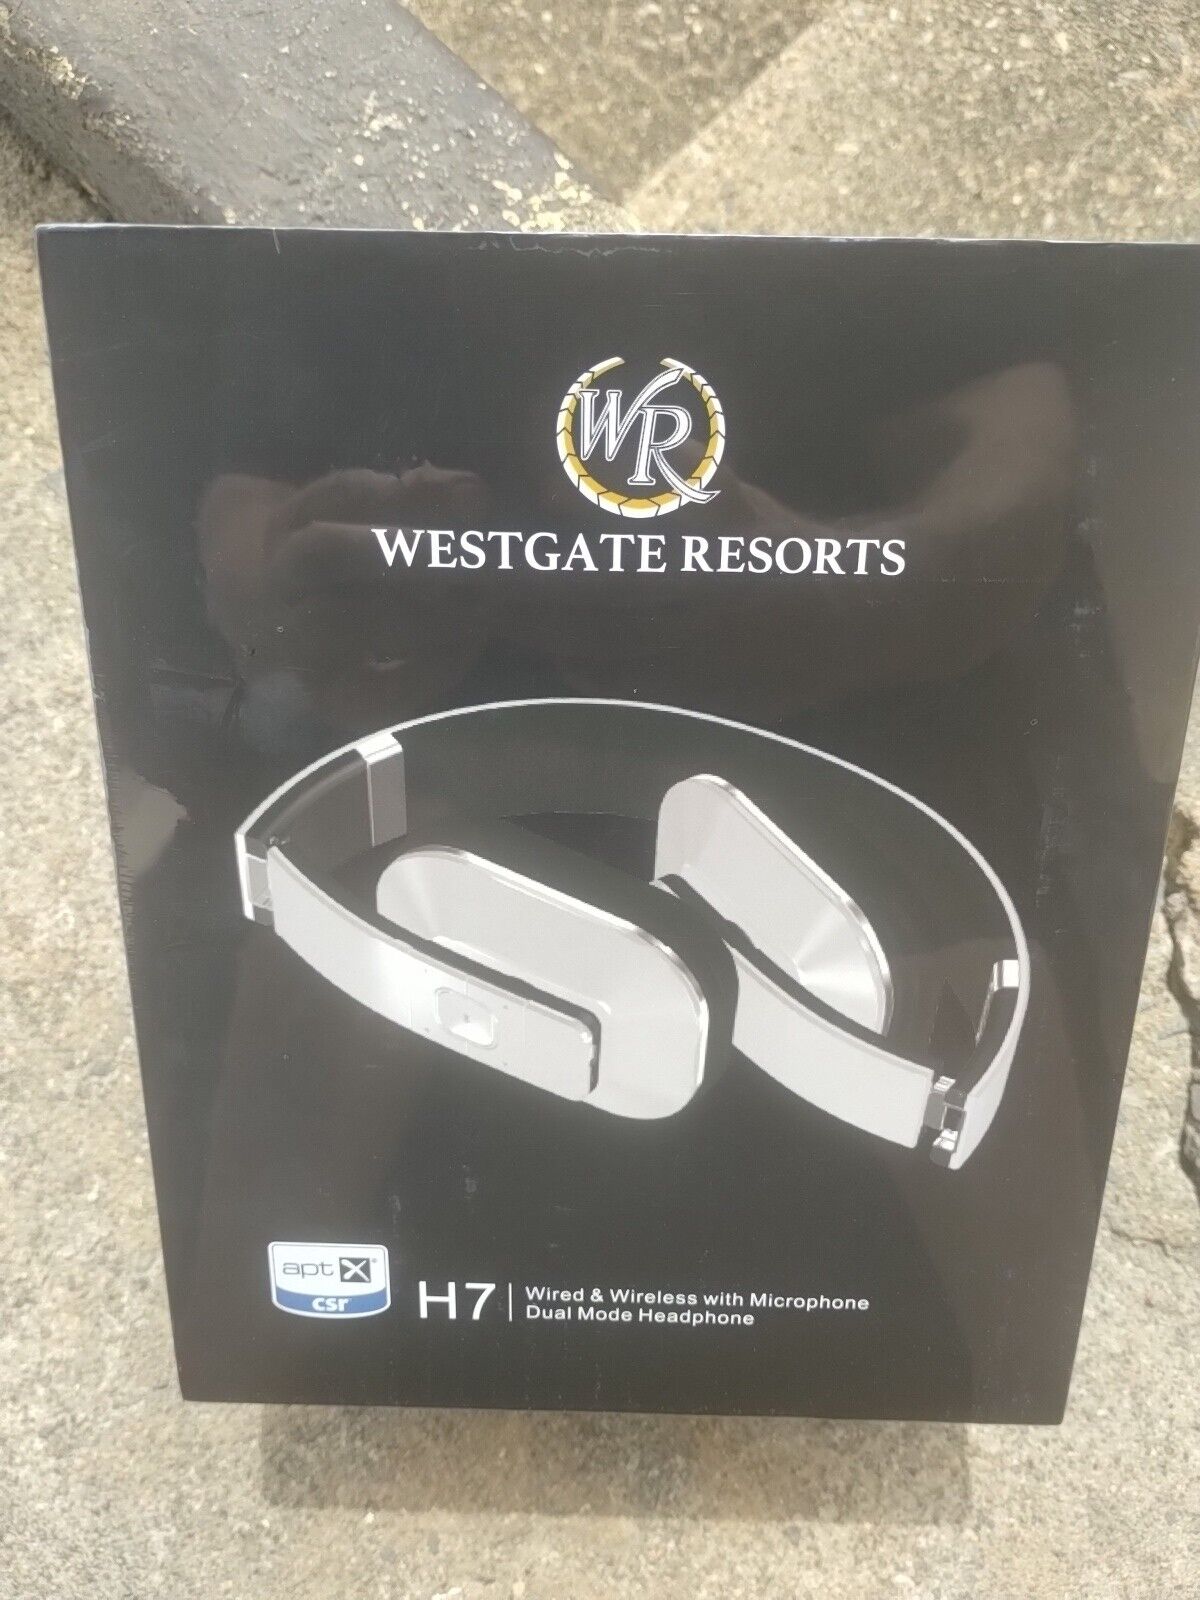 Westgate Resorts H7 Wired& Wireless Dual Mode Headphone Bluetooth Microphone